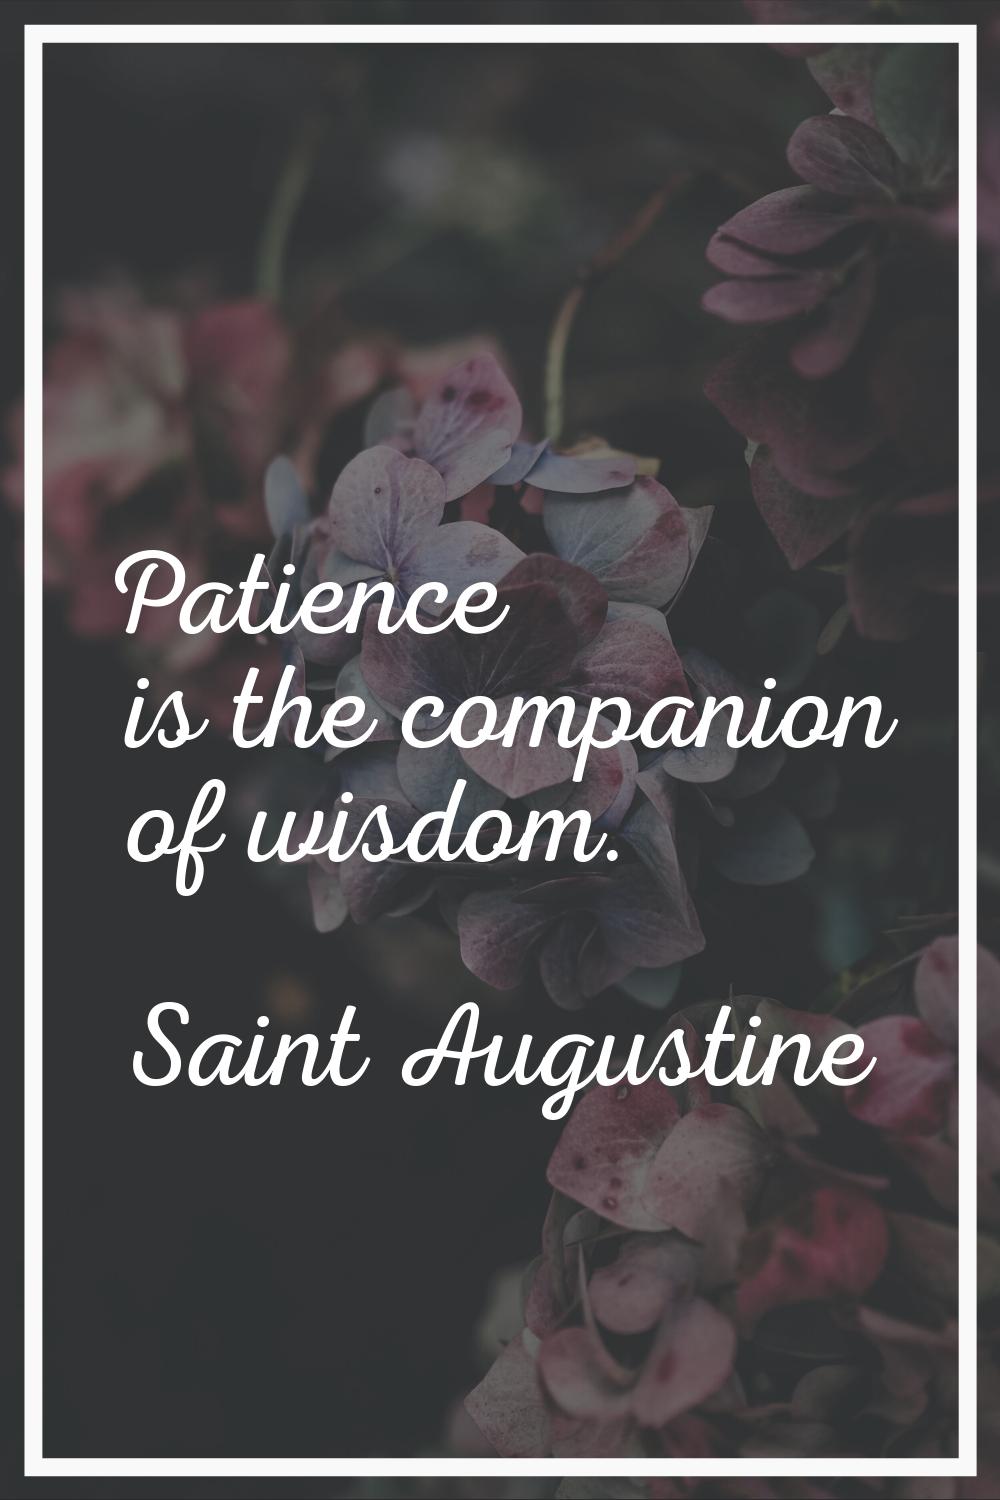 Patience is the companion of wisdom.